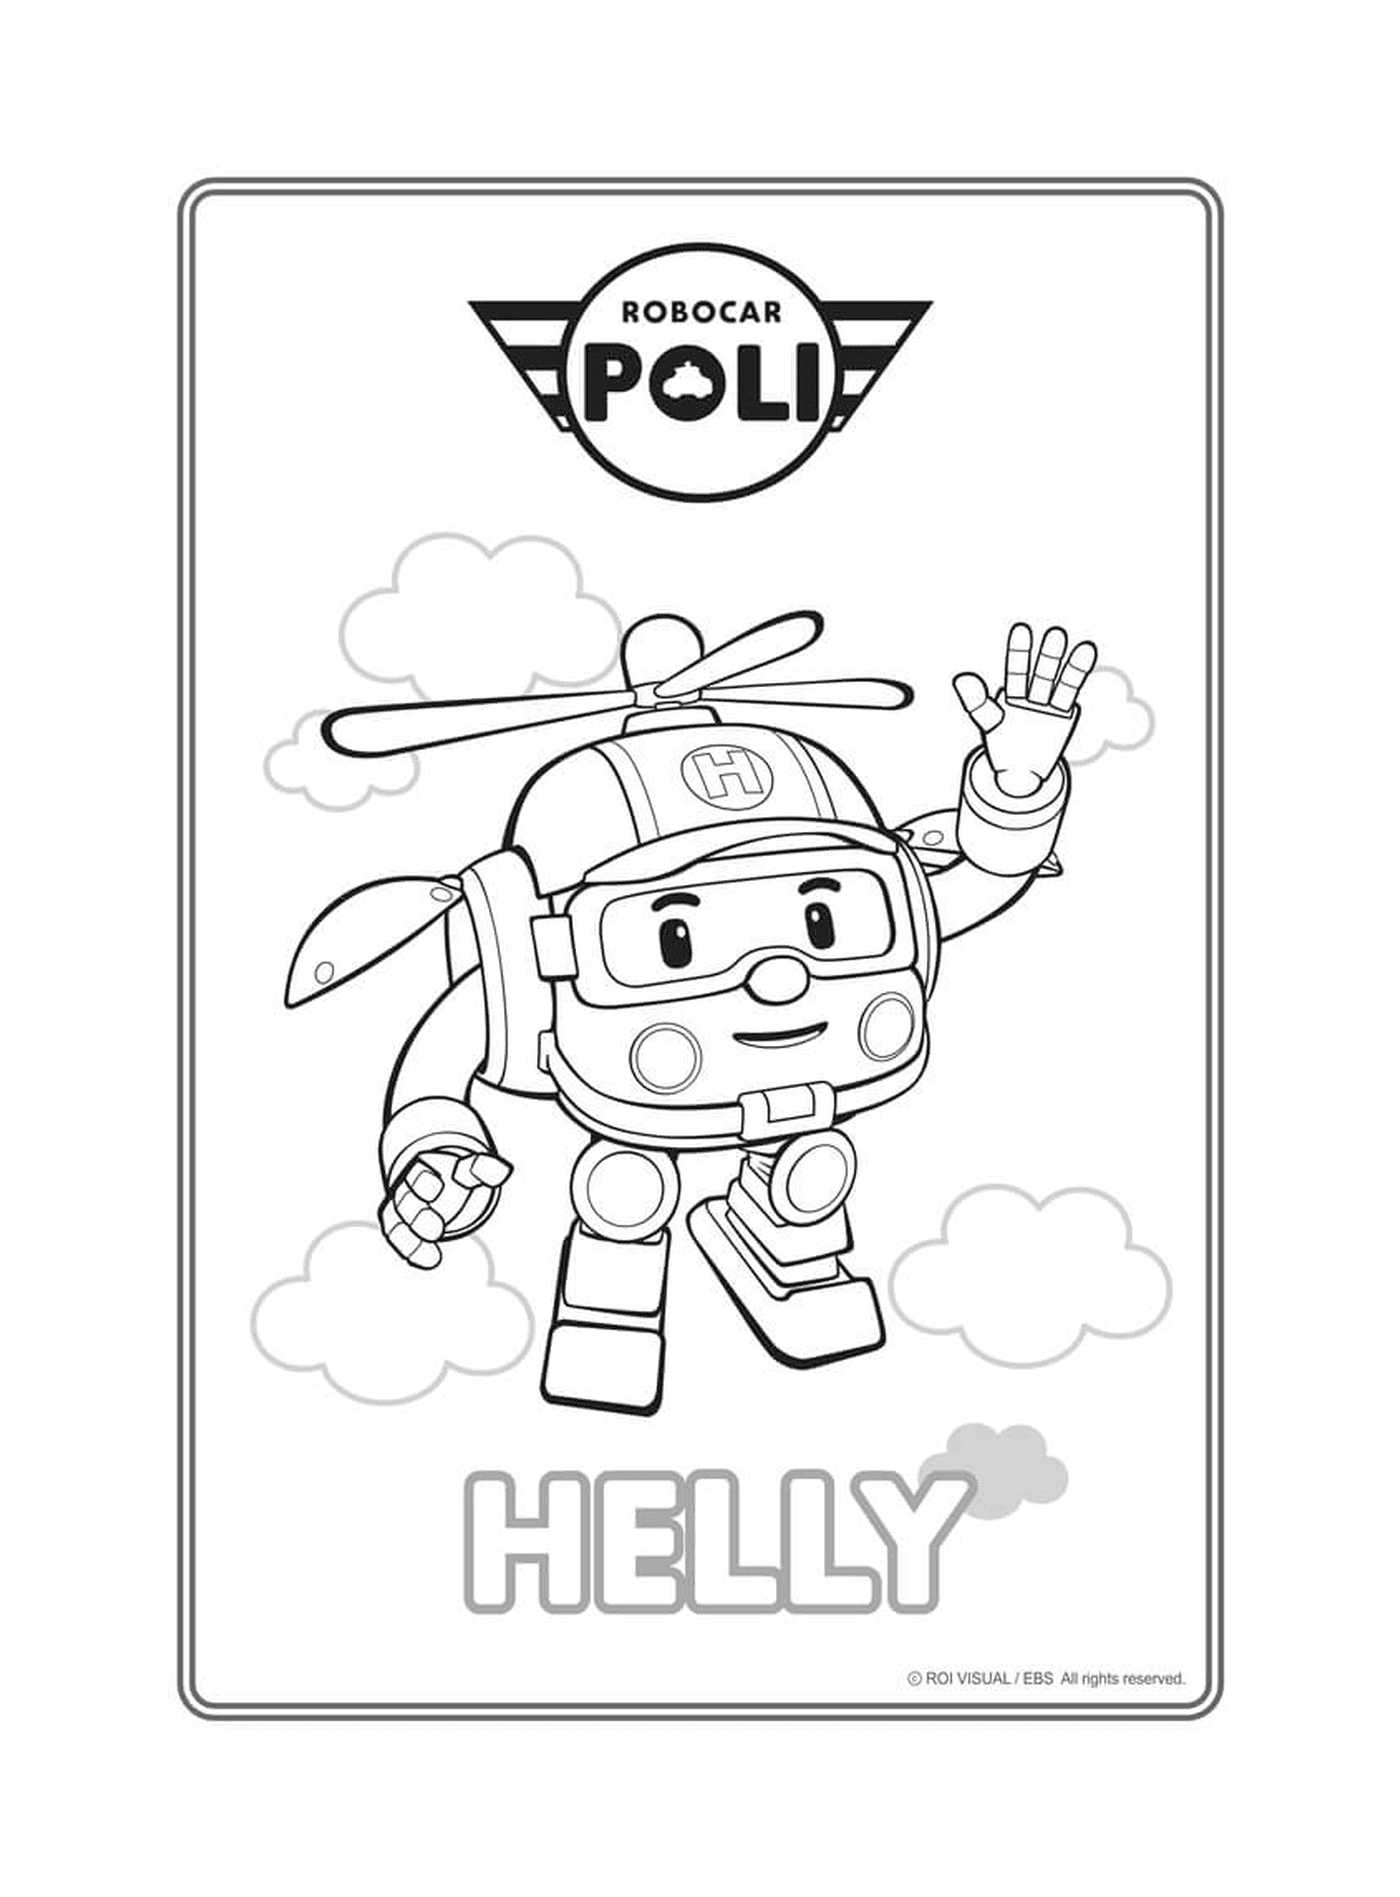  Helly, Robocar Poli's helicopter 